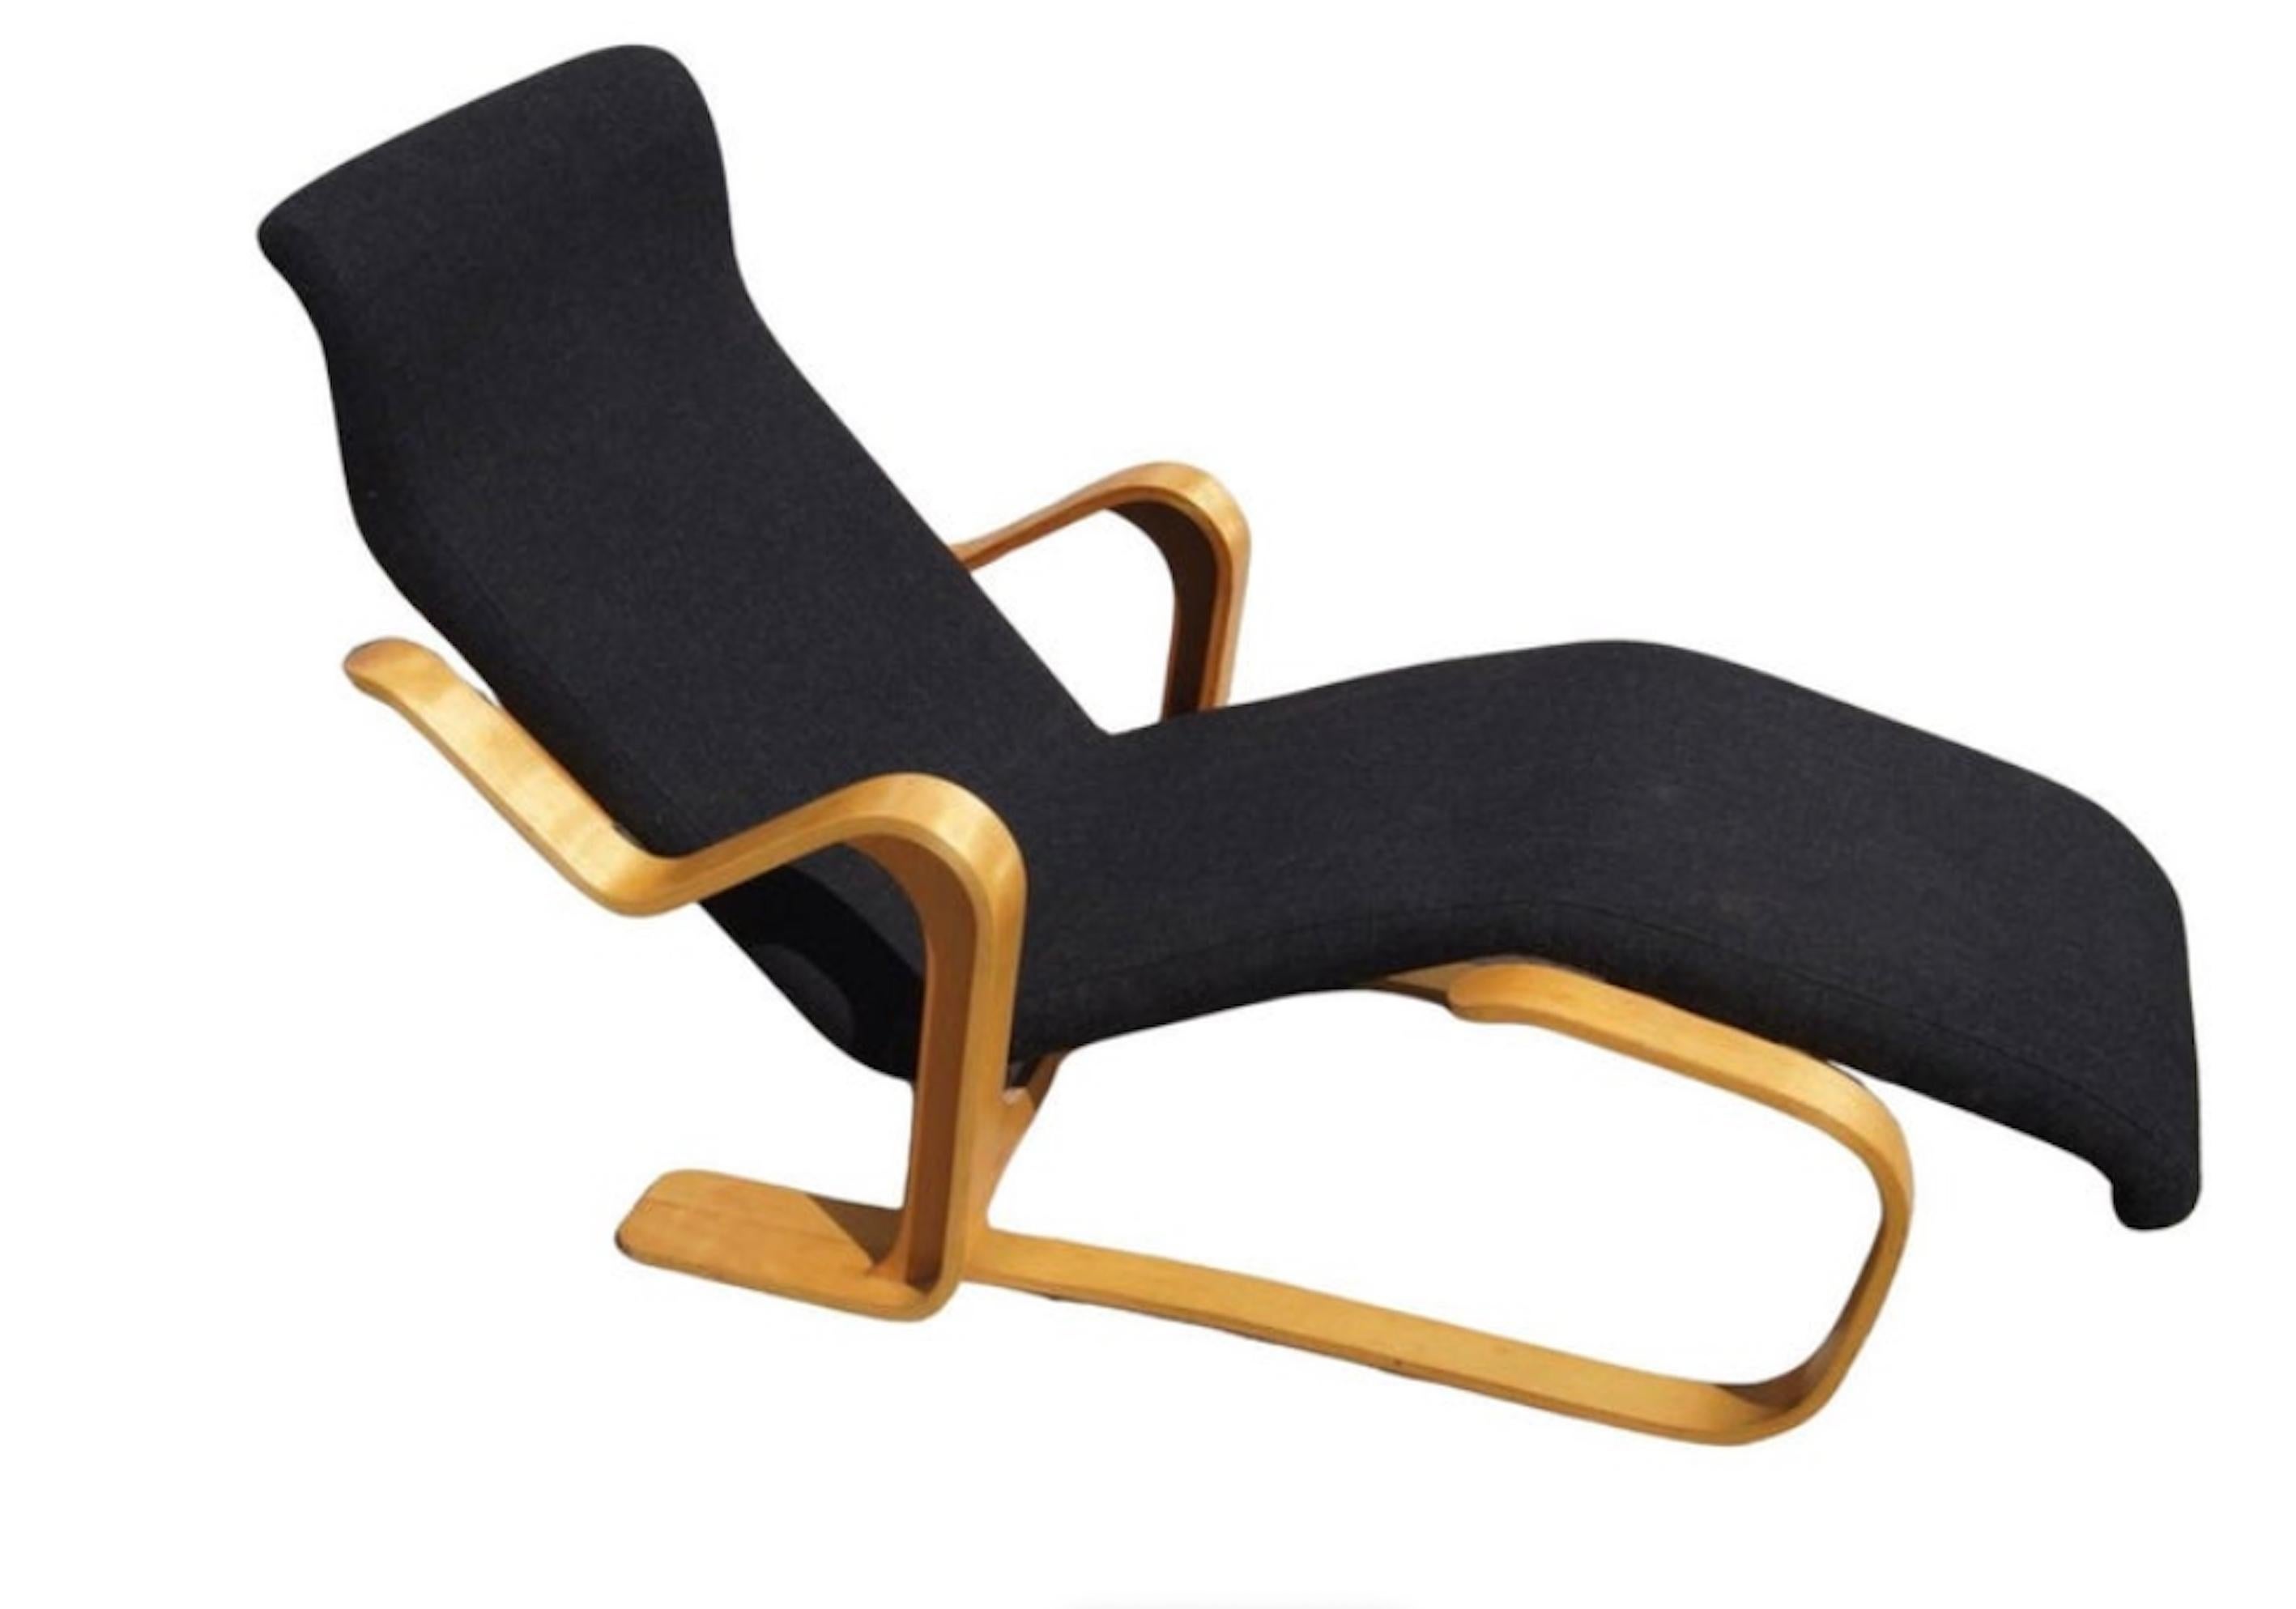 One of the most iconic and elegant chaise longues in the history of design, conceived in the 1930s by the great architect and designer Marcel Breuer for the newly founded English company Isokon Forniture Company.

This model, reissued by Knoll in